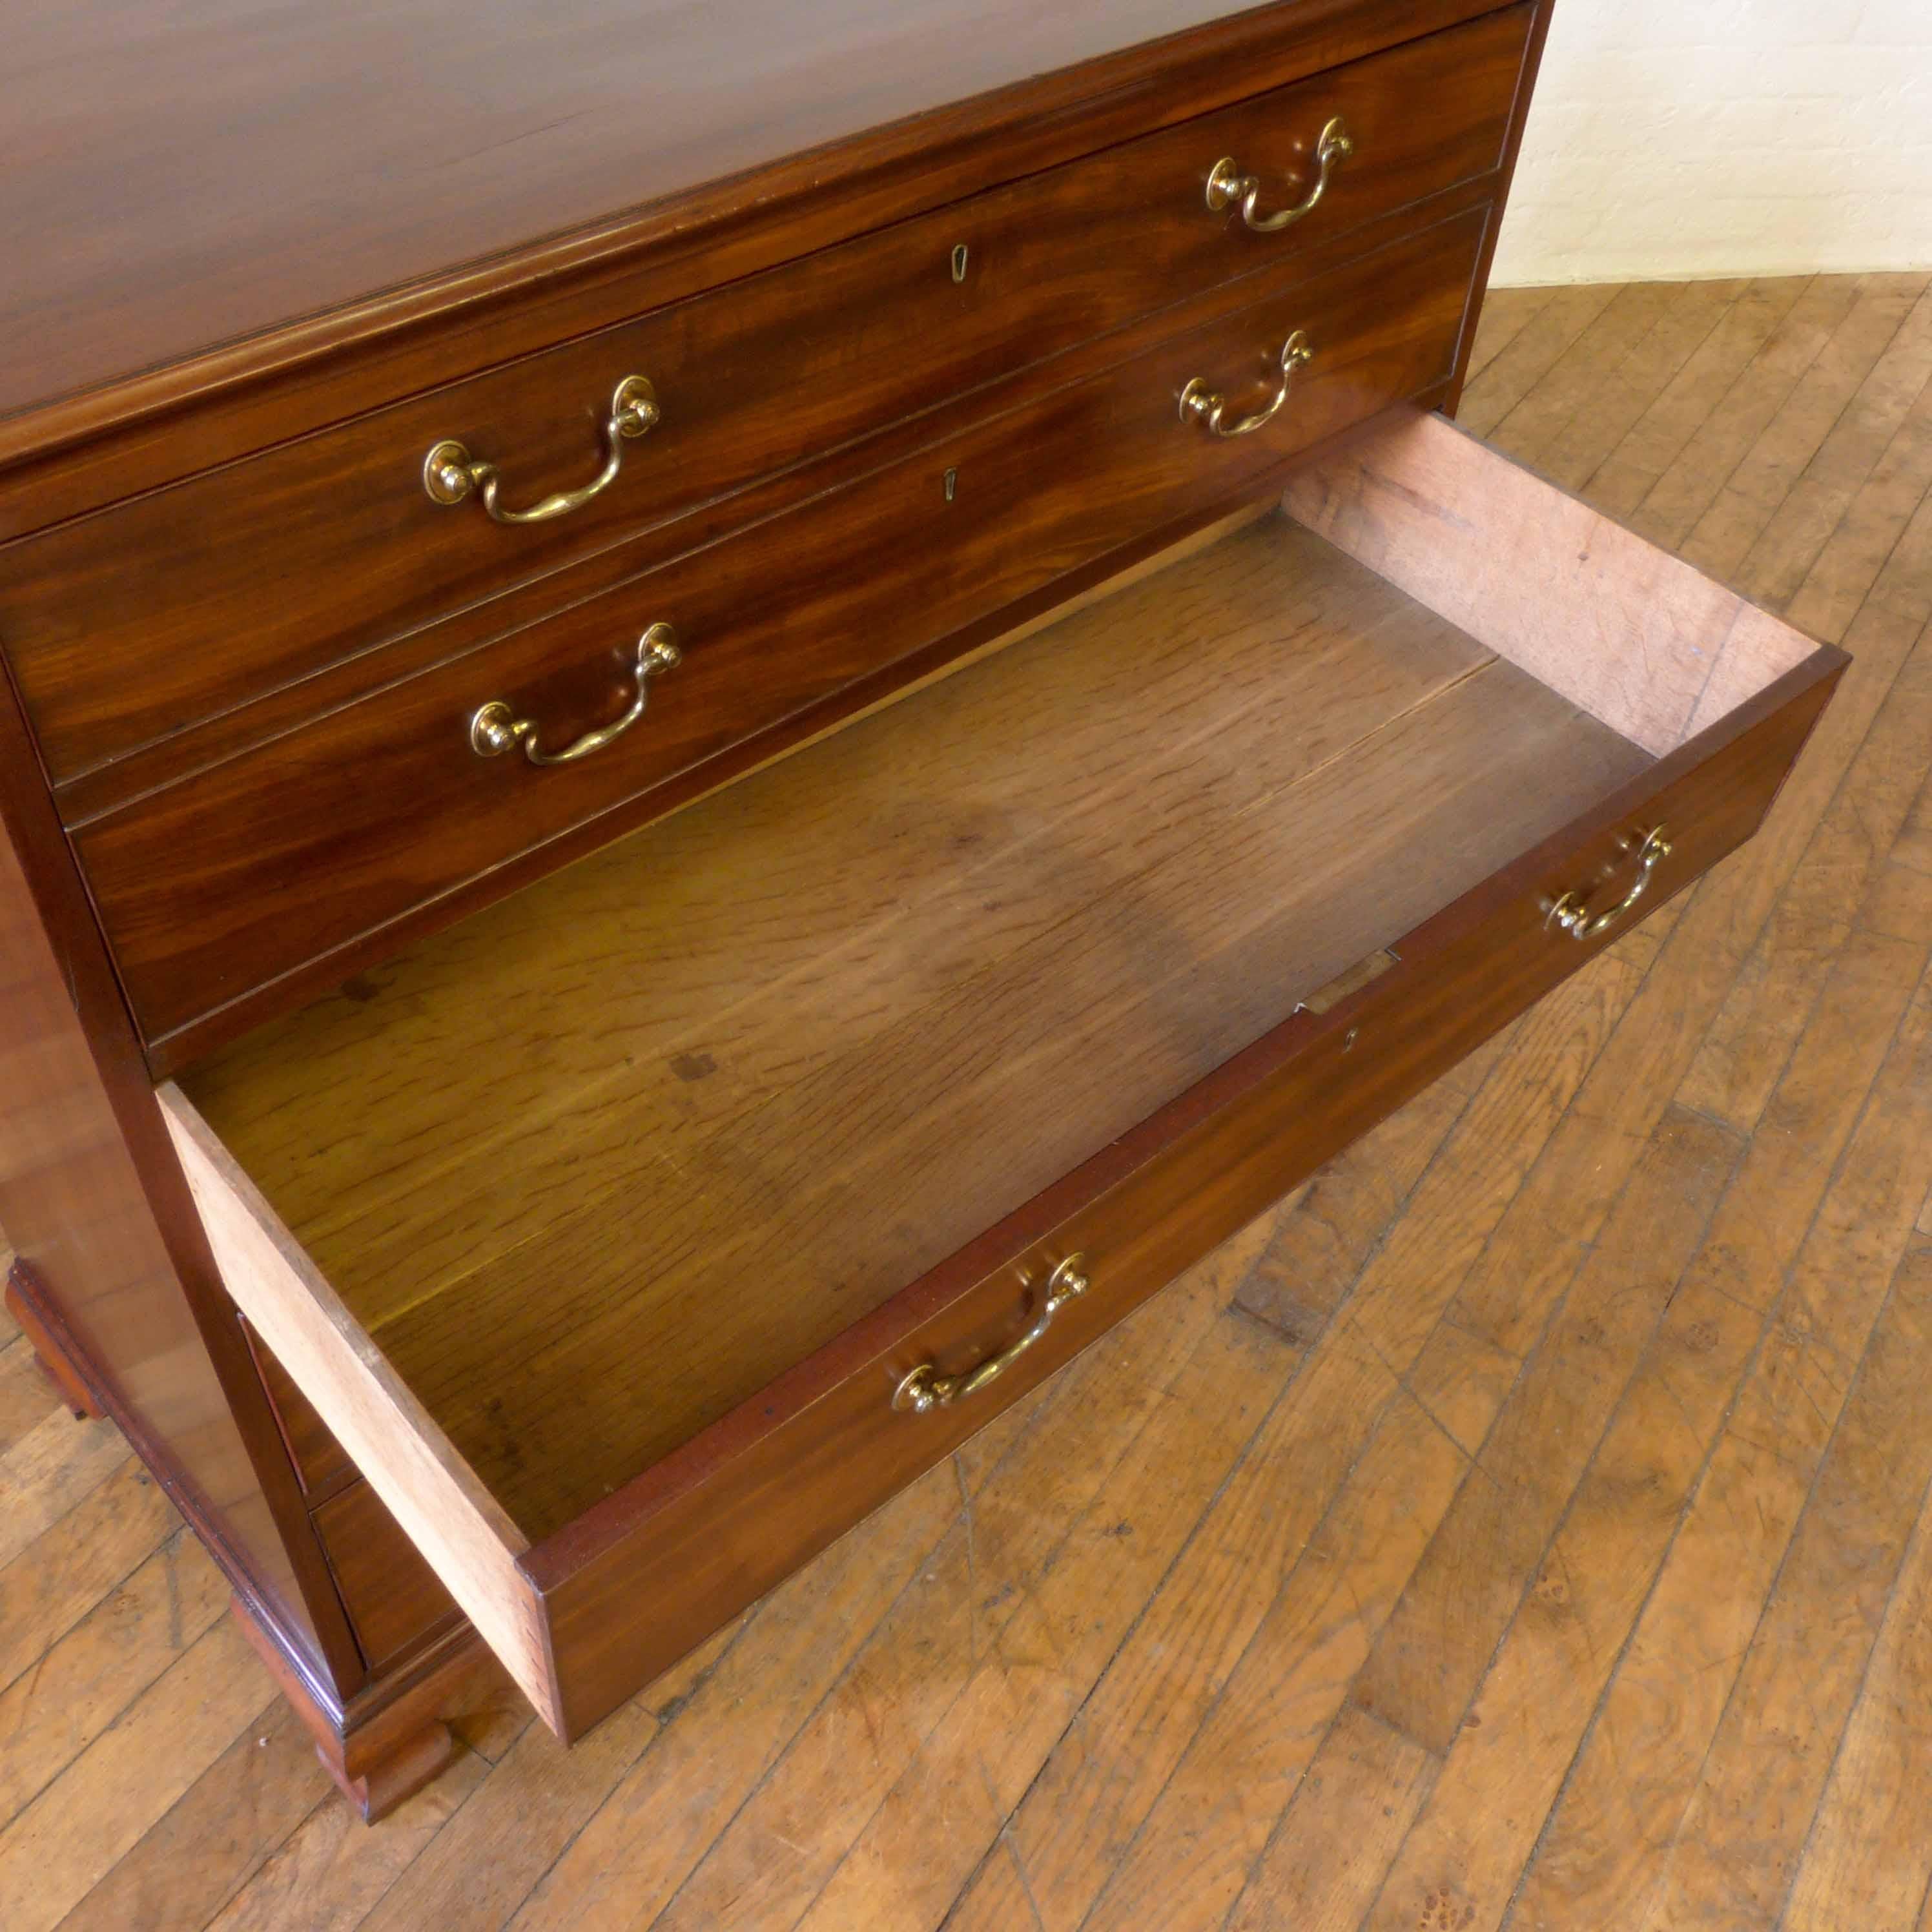 English George III Mahogany Secretaire Chest For Sale